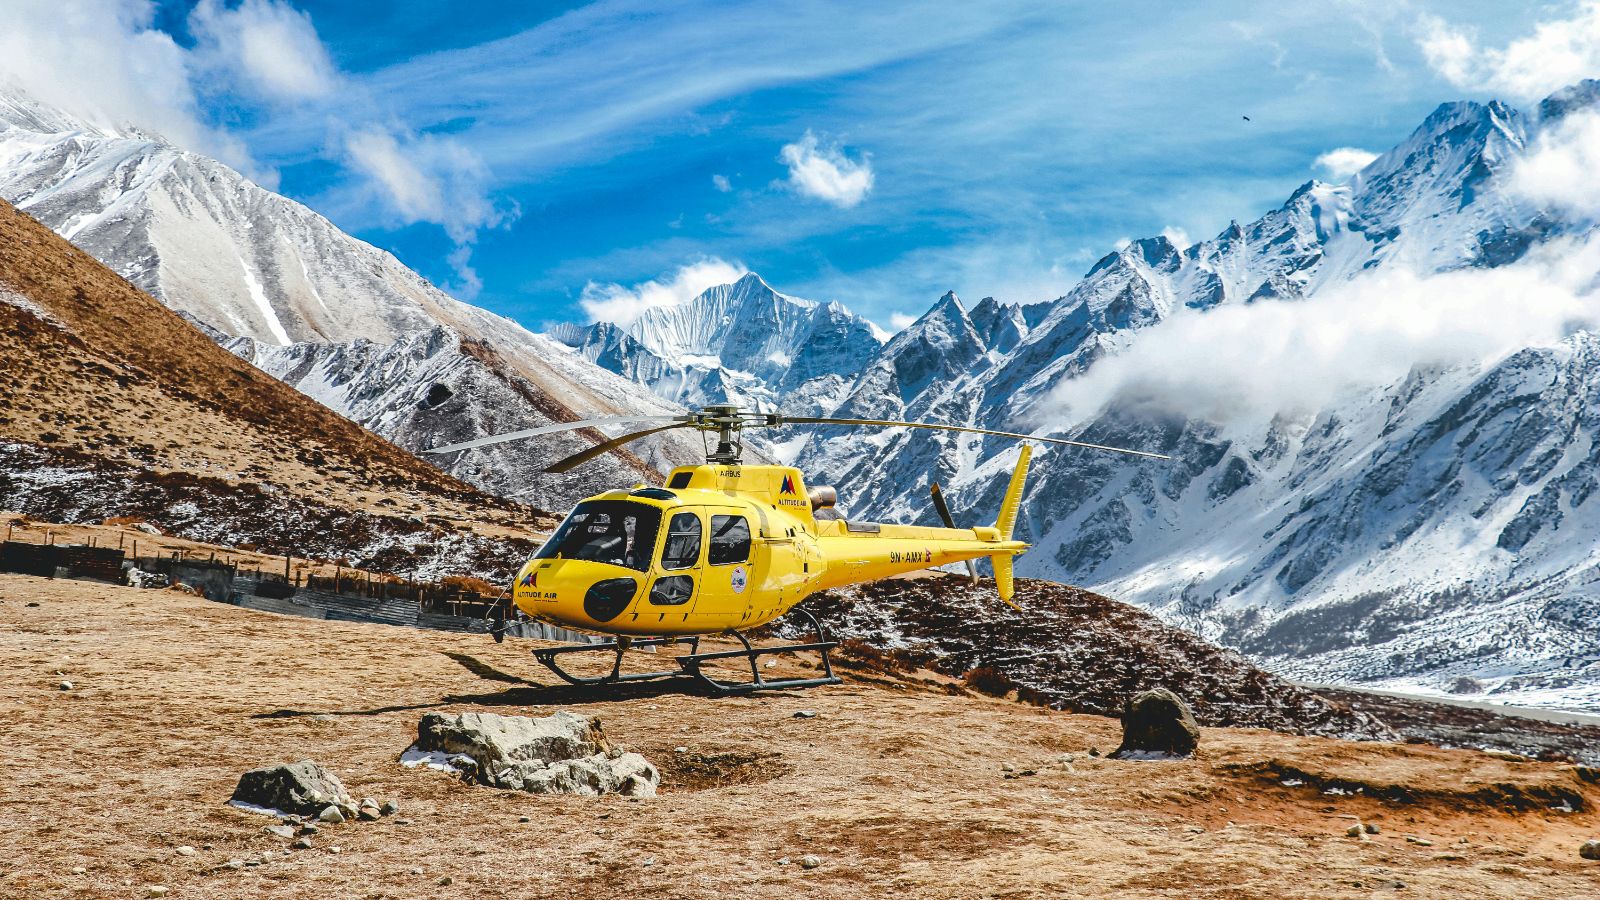 A helicopter parked in the Himalayas